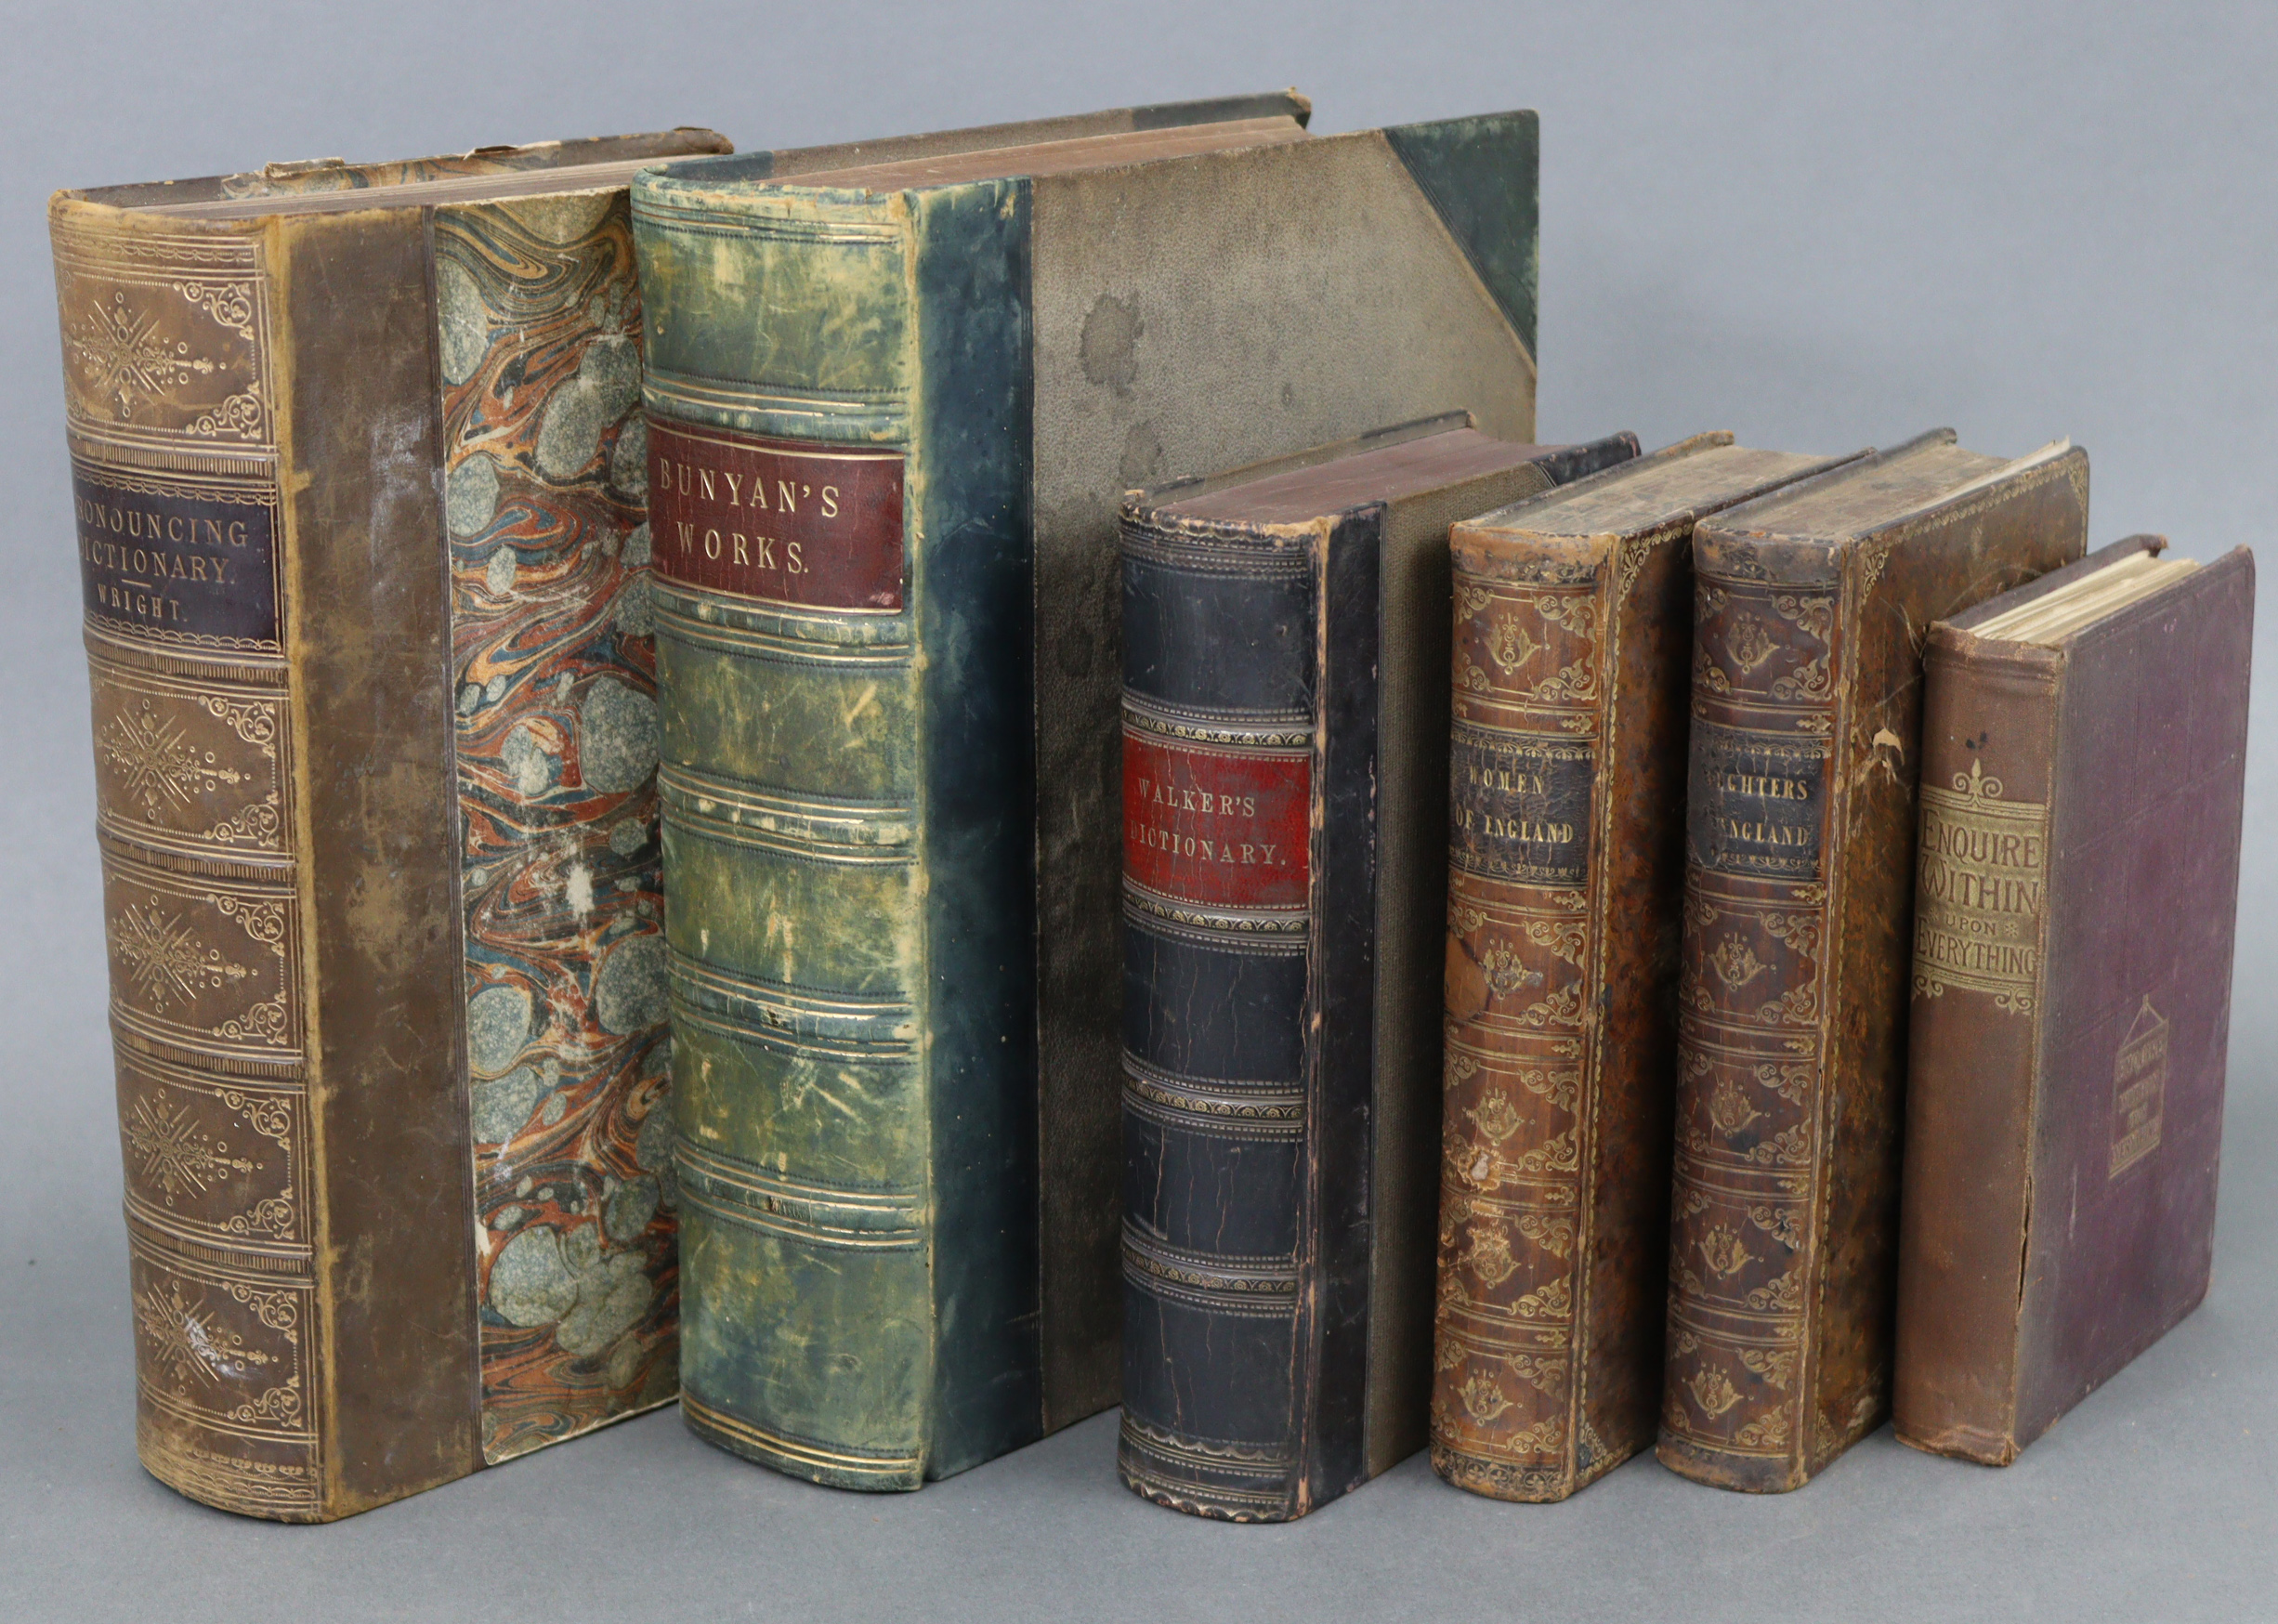 Two 19th century leather-bound volumes by Mrs Ellis “The Daughters of England” & “The Women of